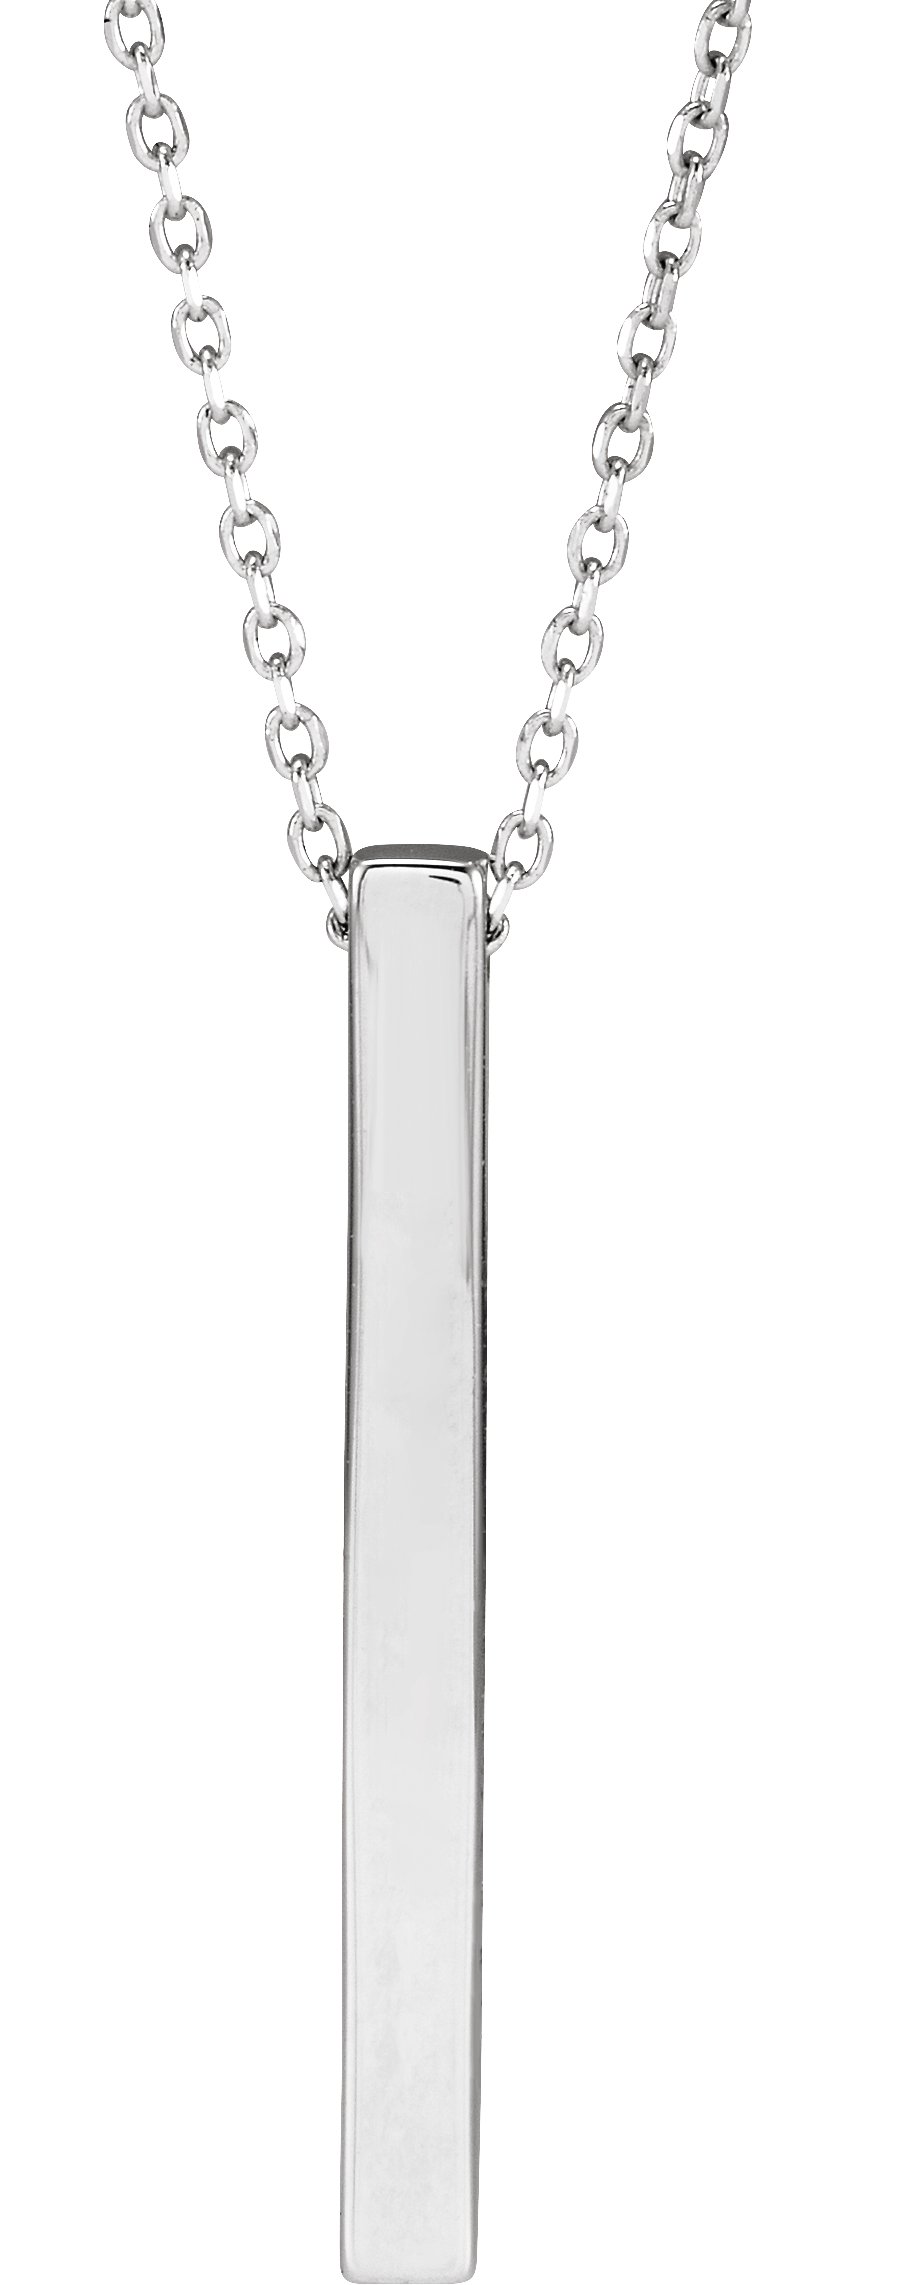 Sterling Silver Engravable Four-Sided Bar 16-18" Necklace